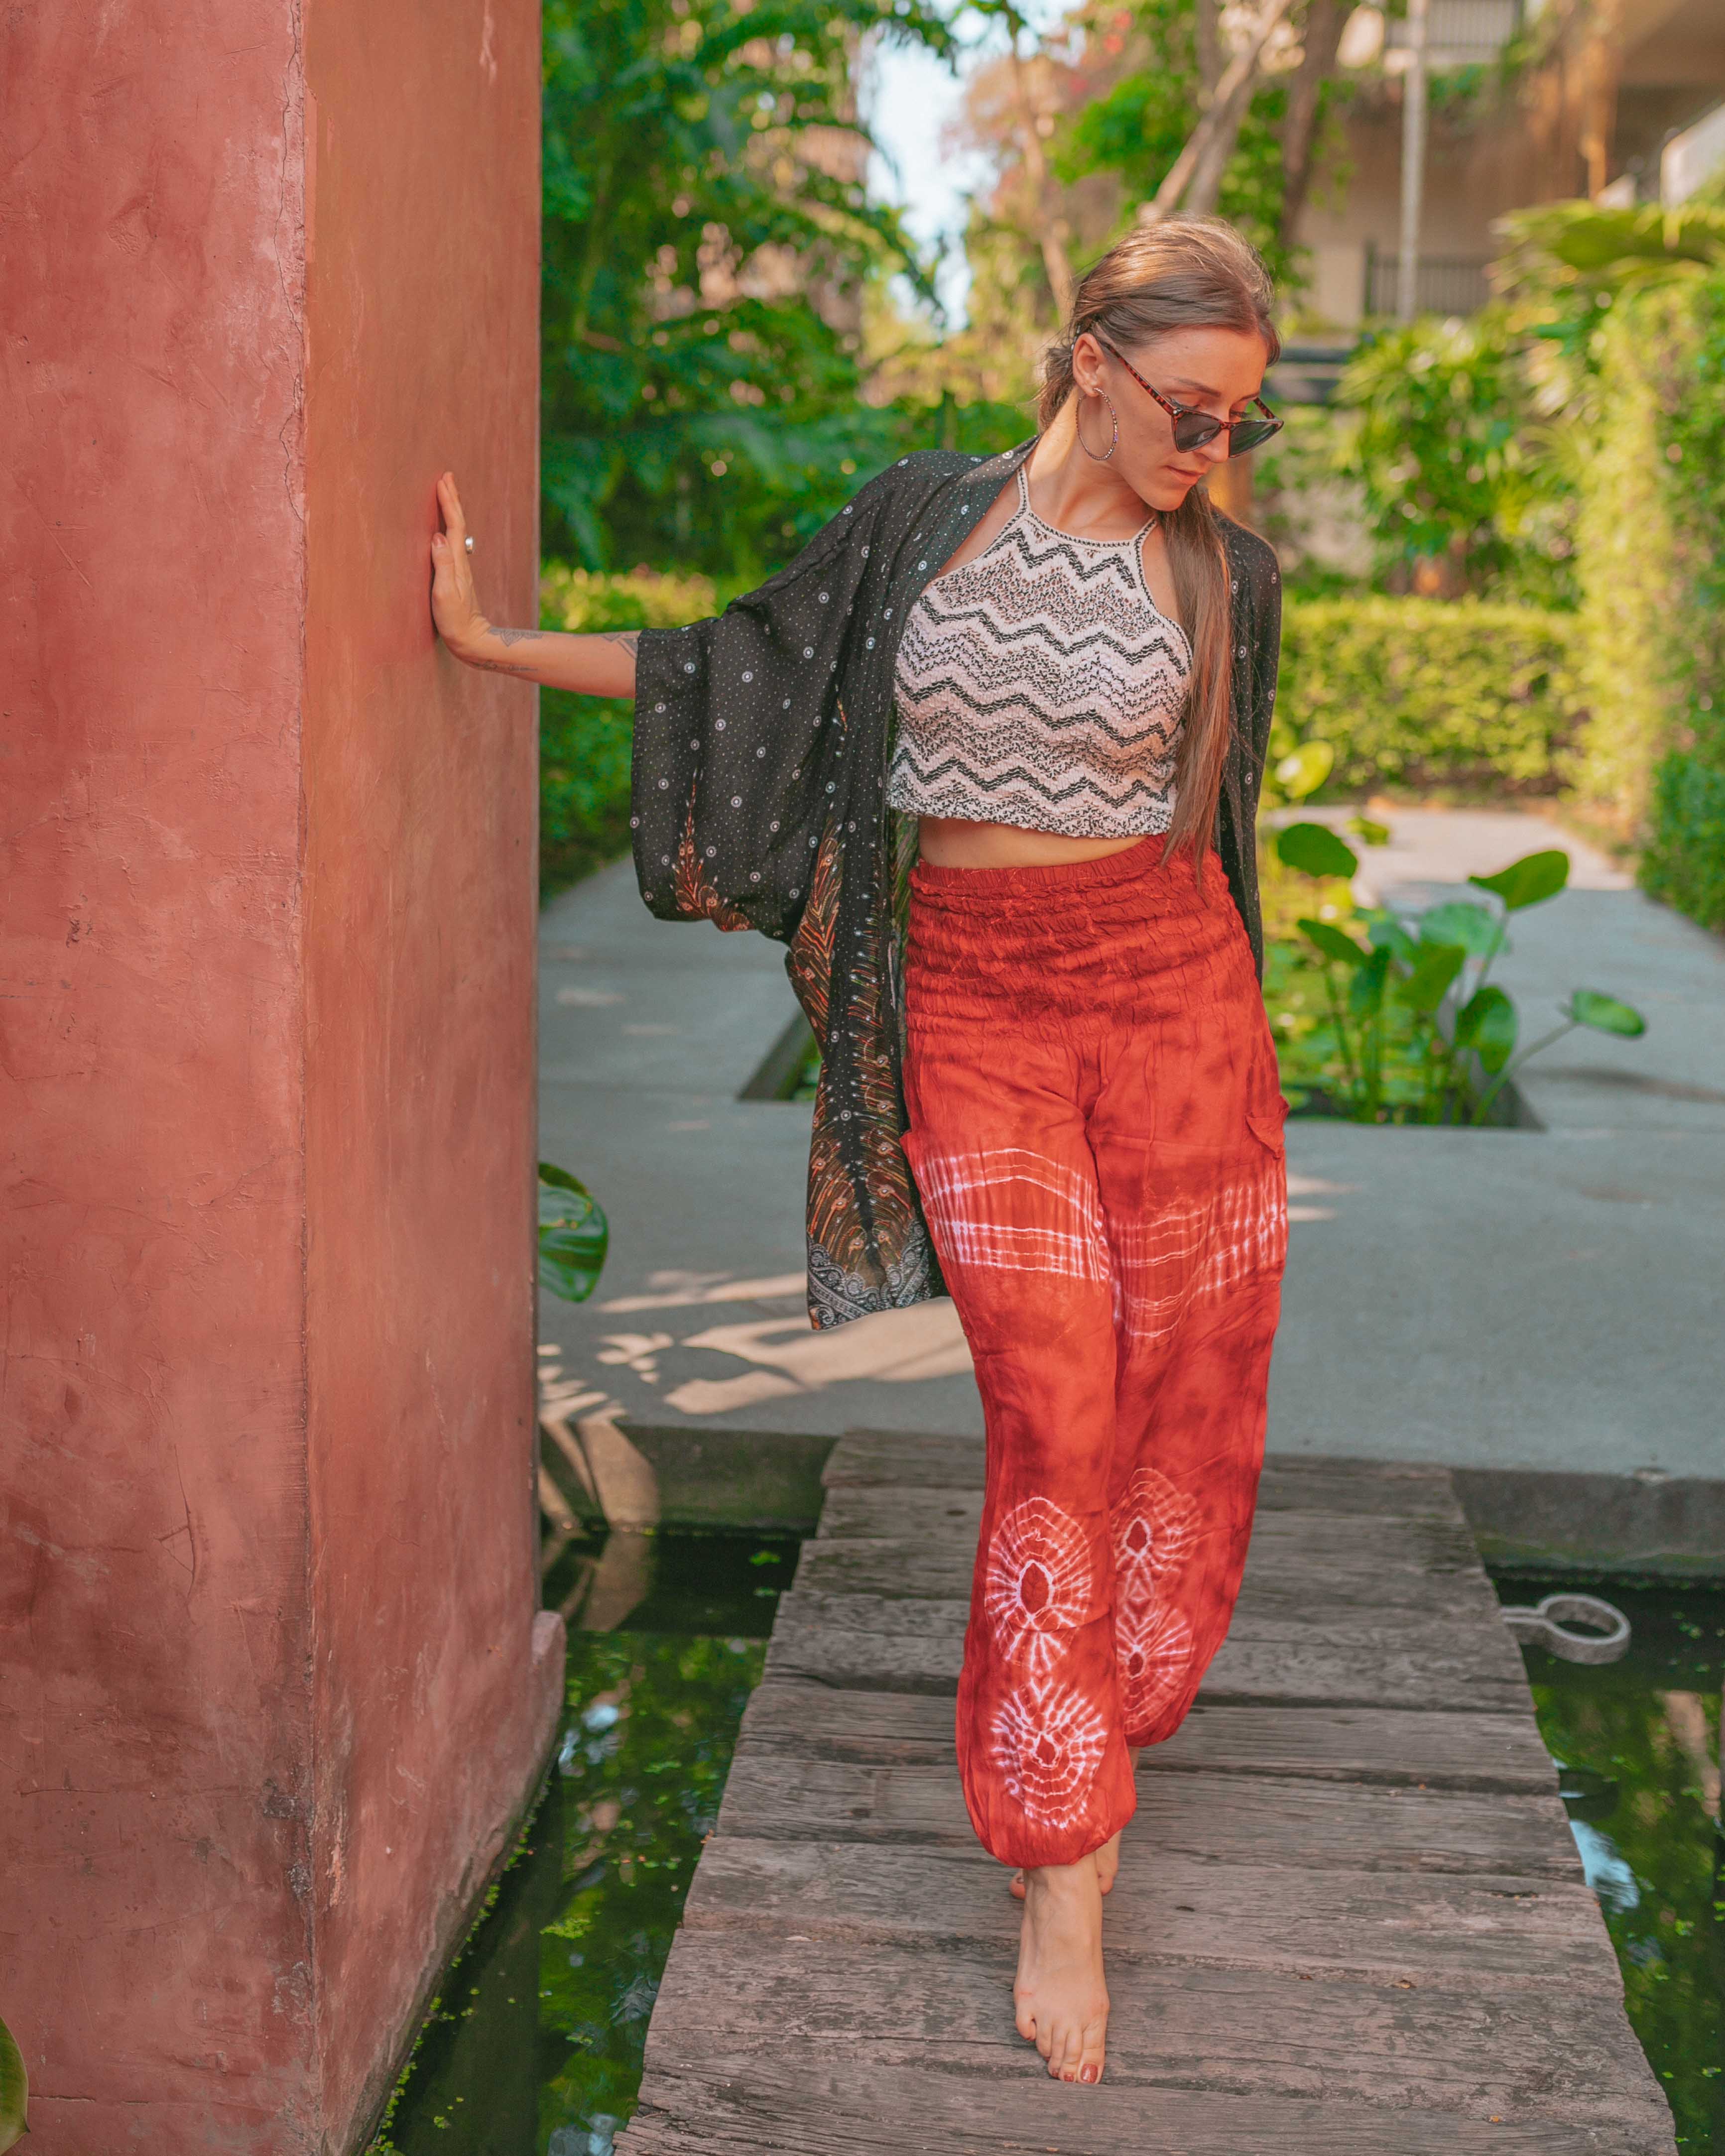 TIE DYE PANTS - RED Elepanta Elastic Waist | Harem Pants - Buy Today Elephant Pants Jewelry And Bohemian Clothes Handmade In Thailand Help To Save The Elephants FairTrade And Vegan